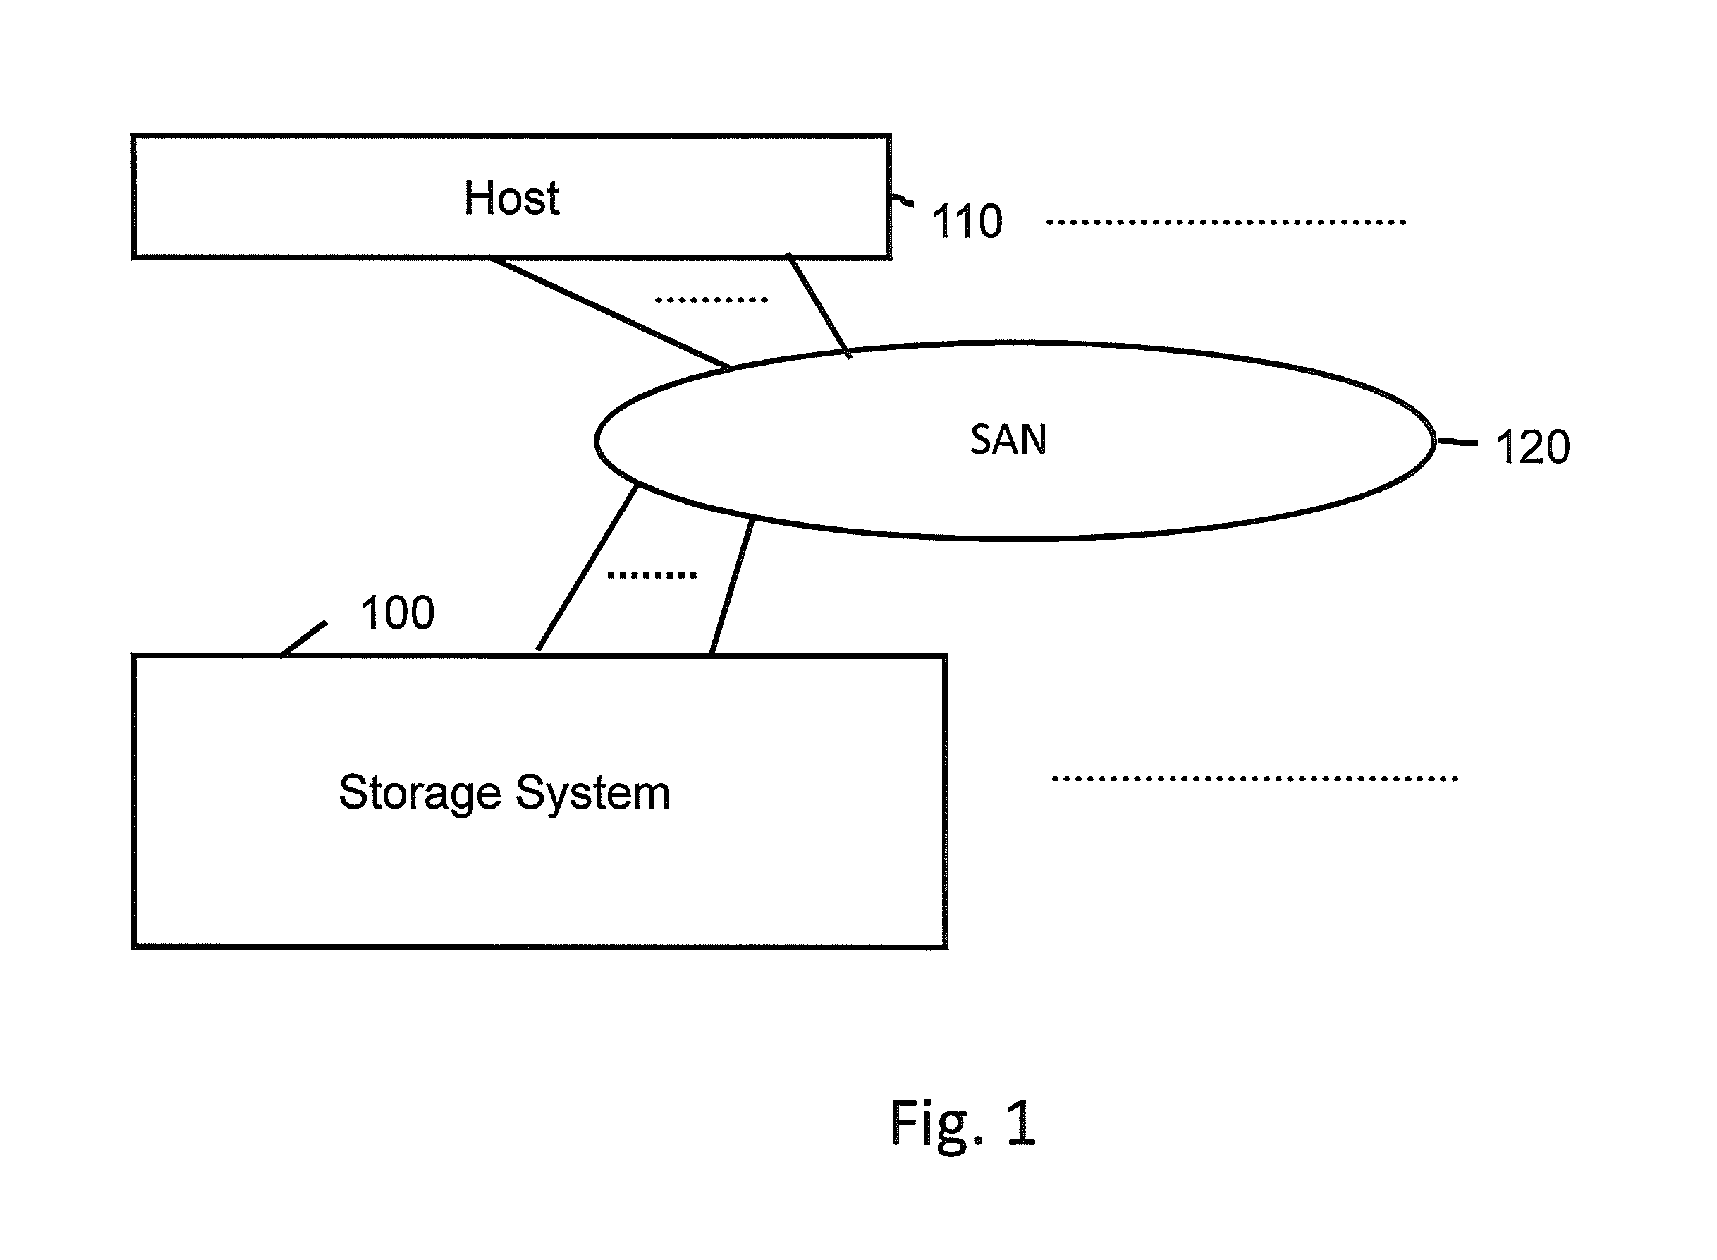 Volume groups storing multiple generations of data in flash memory packages